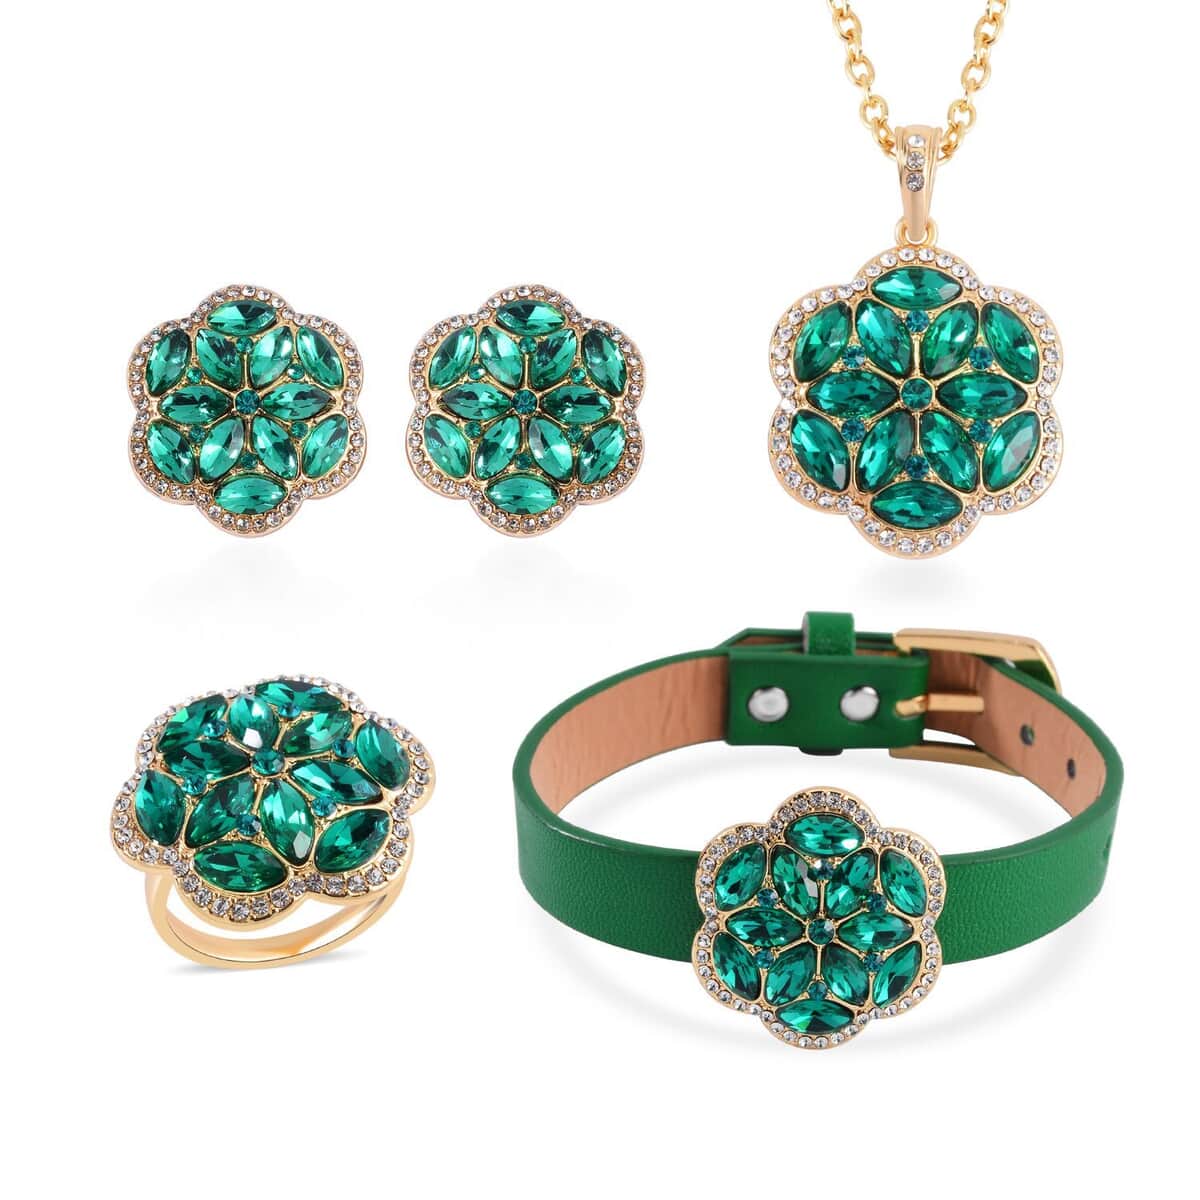 Green and White Austrian Crystal, Faux Leather Floral Bracelet (6-8In), Earrings, Ring (Size 7.0) and Pendant Necklace 20-22 Inches In Goldtone image number 0